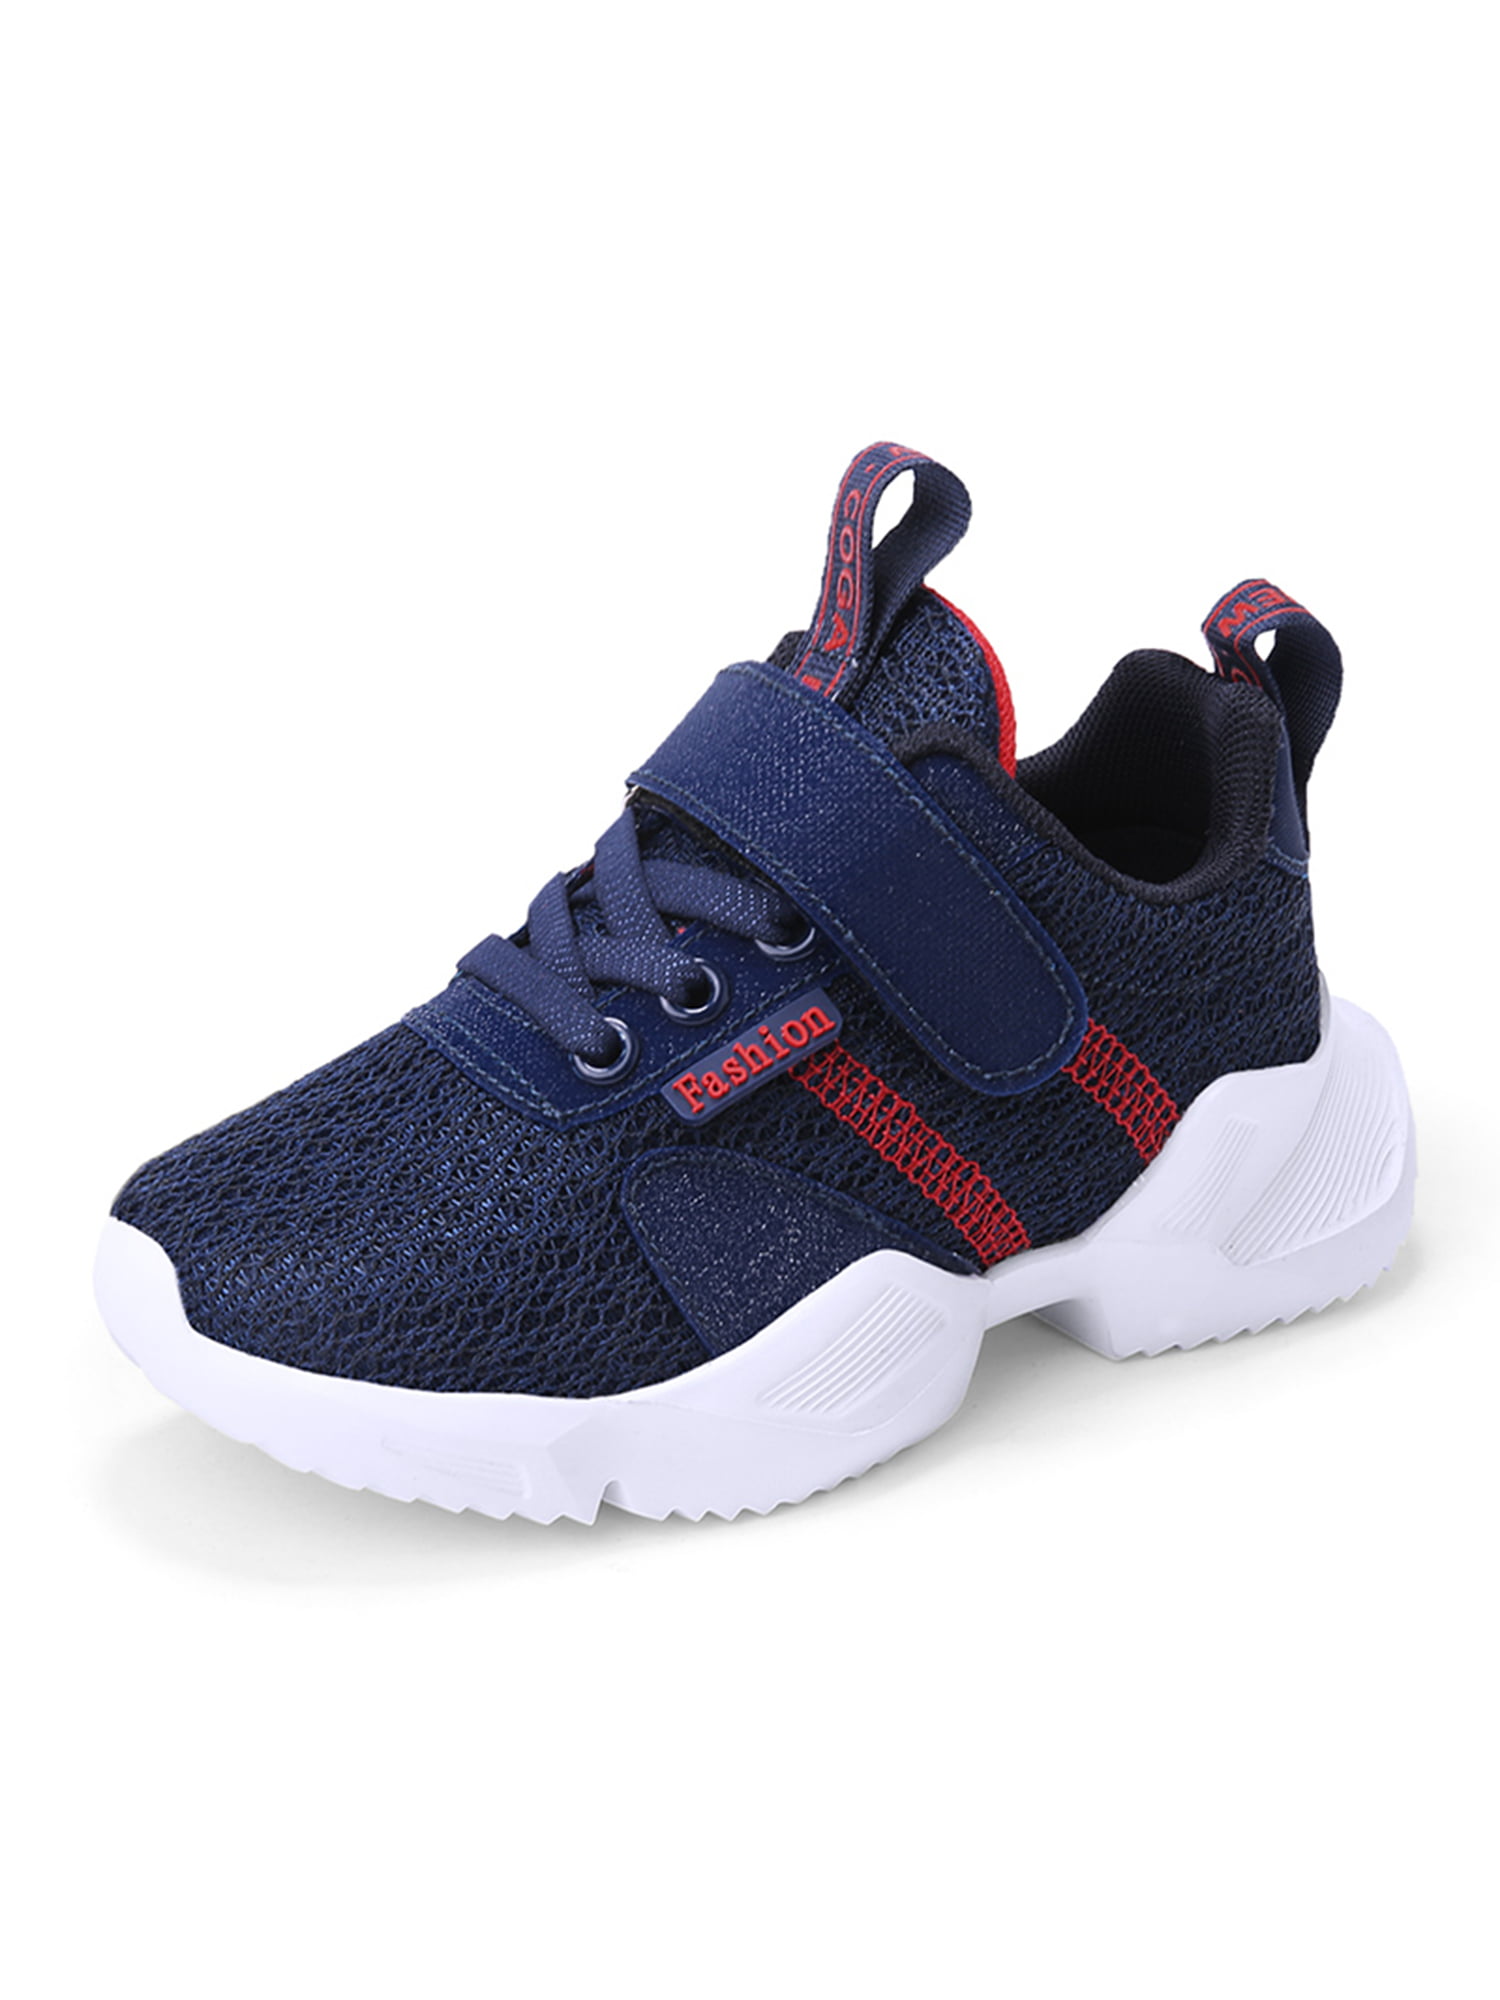 Kids Shoes Toddlers Canvas Sneakers Slip-on Comfortable Light Weight Skin-Friendly Causal Running Tennis Shoes for Baby Boys Girls